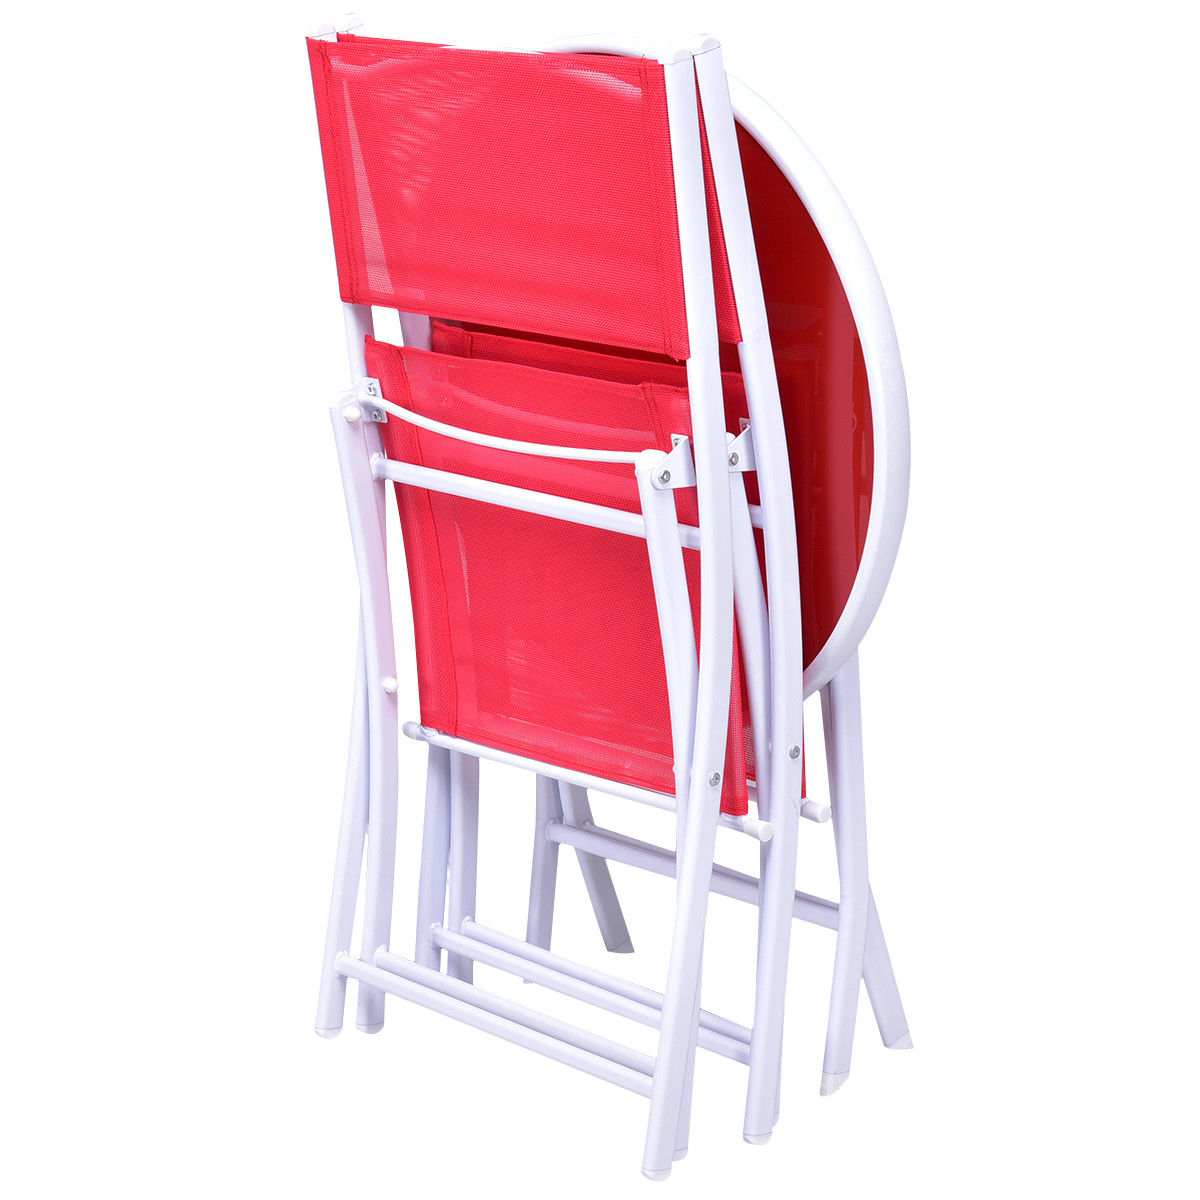 Costway 3 PCS Folding Bistro Table Chairs Set Garden Backyard Patio Furniture Red - image 4 of 7